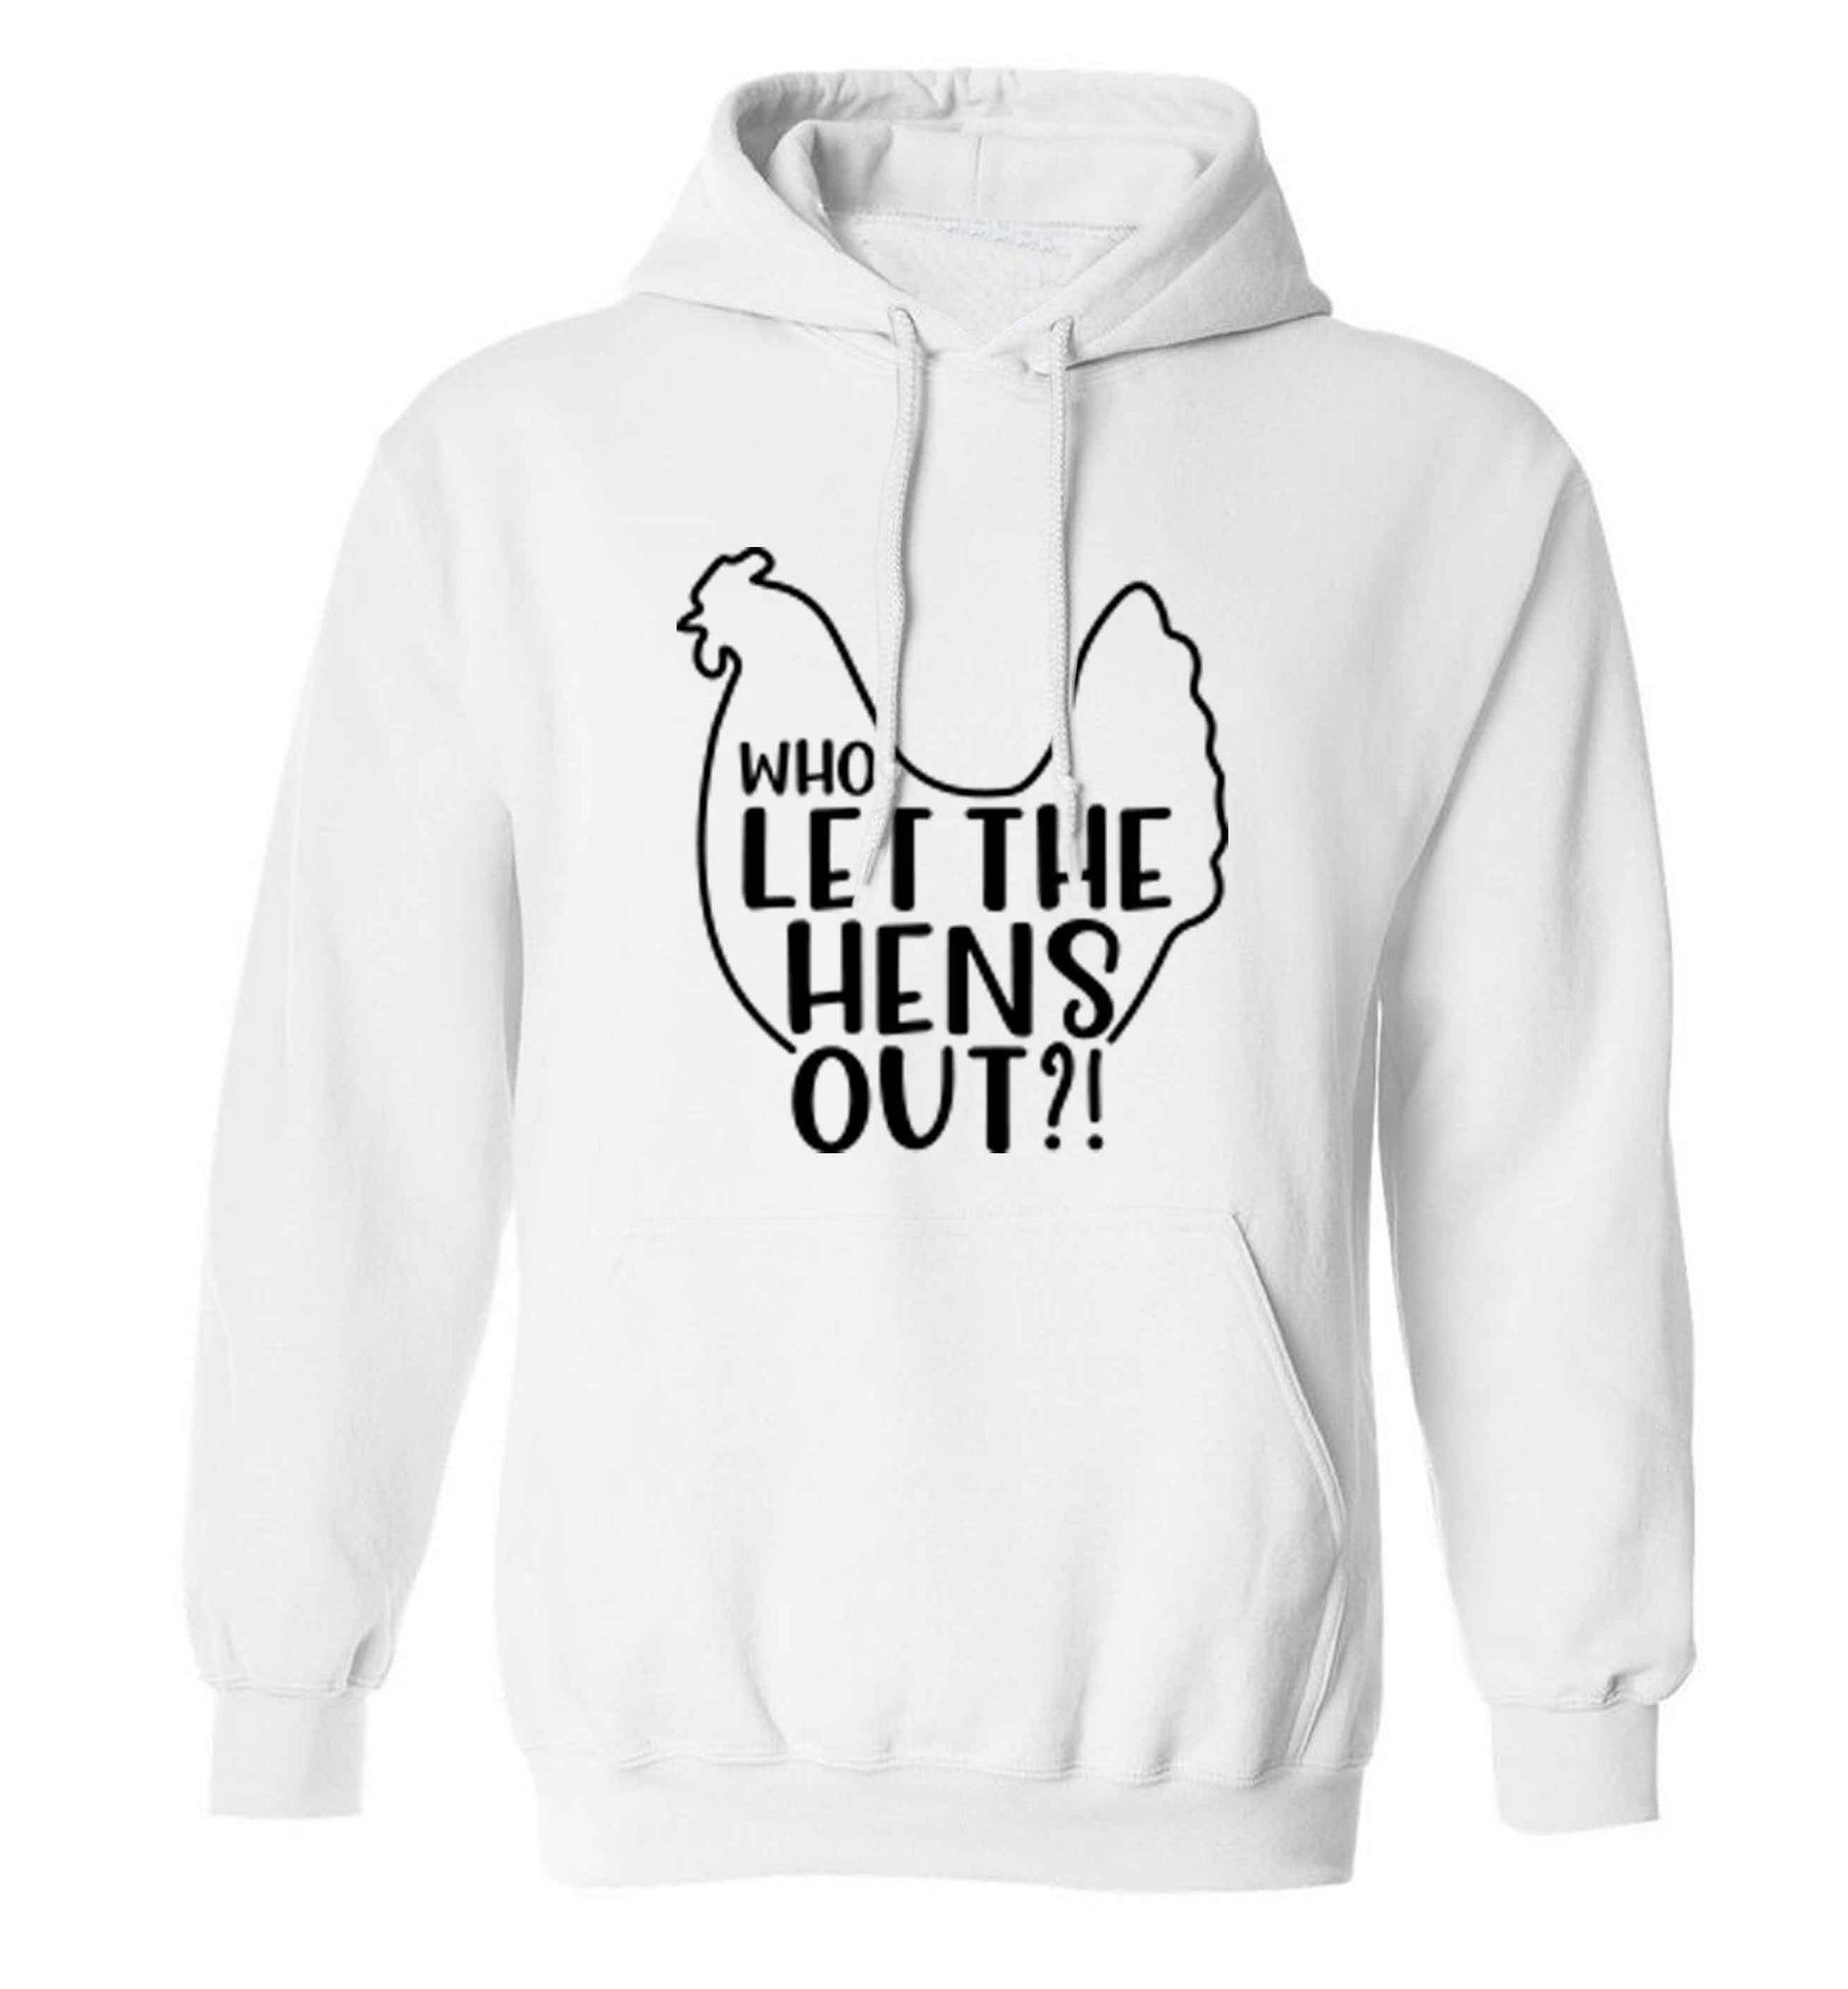 Who let the hens out adults unisex white hoodie 2XL